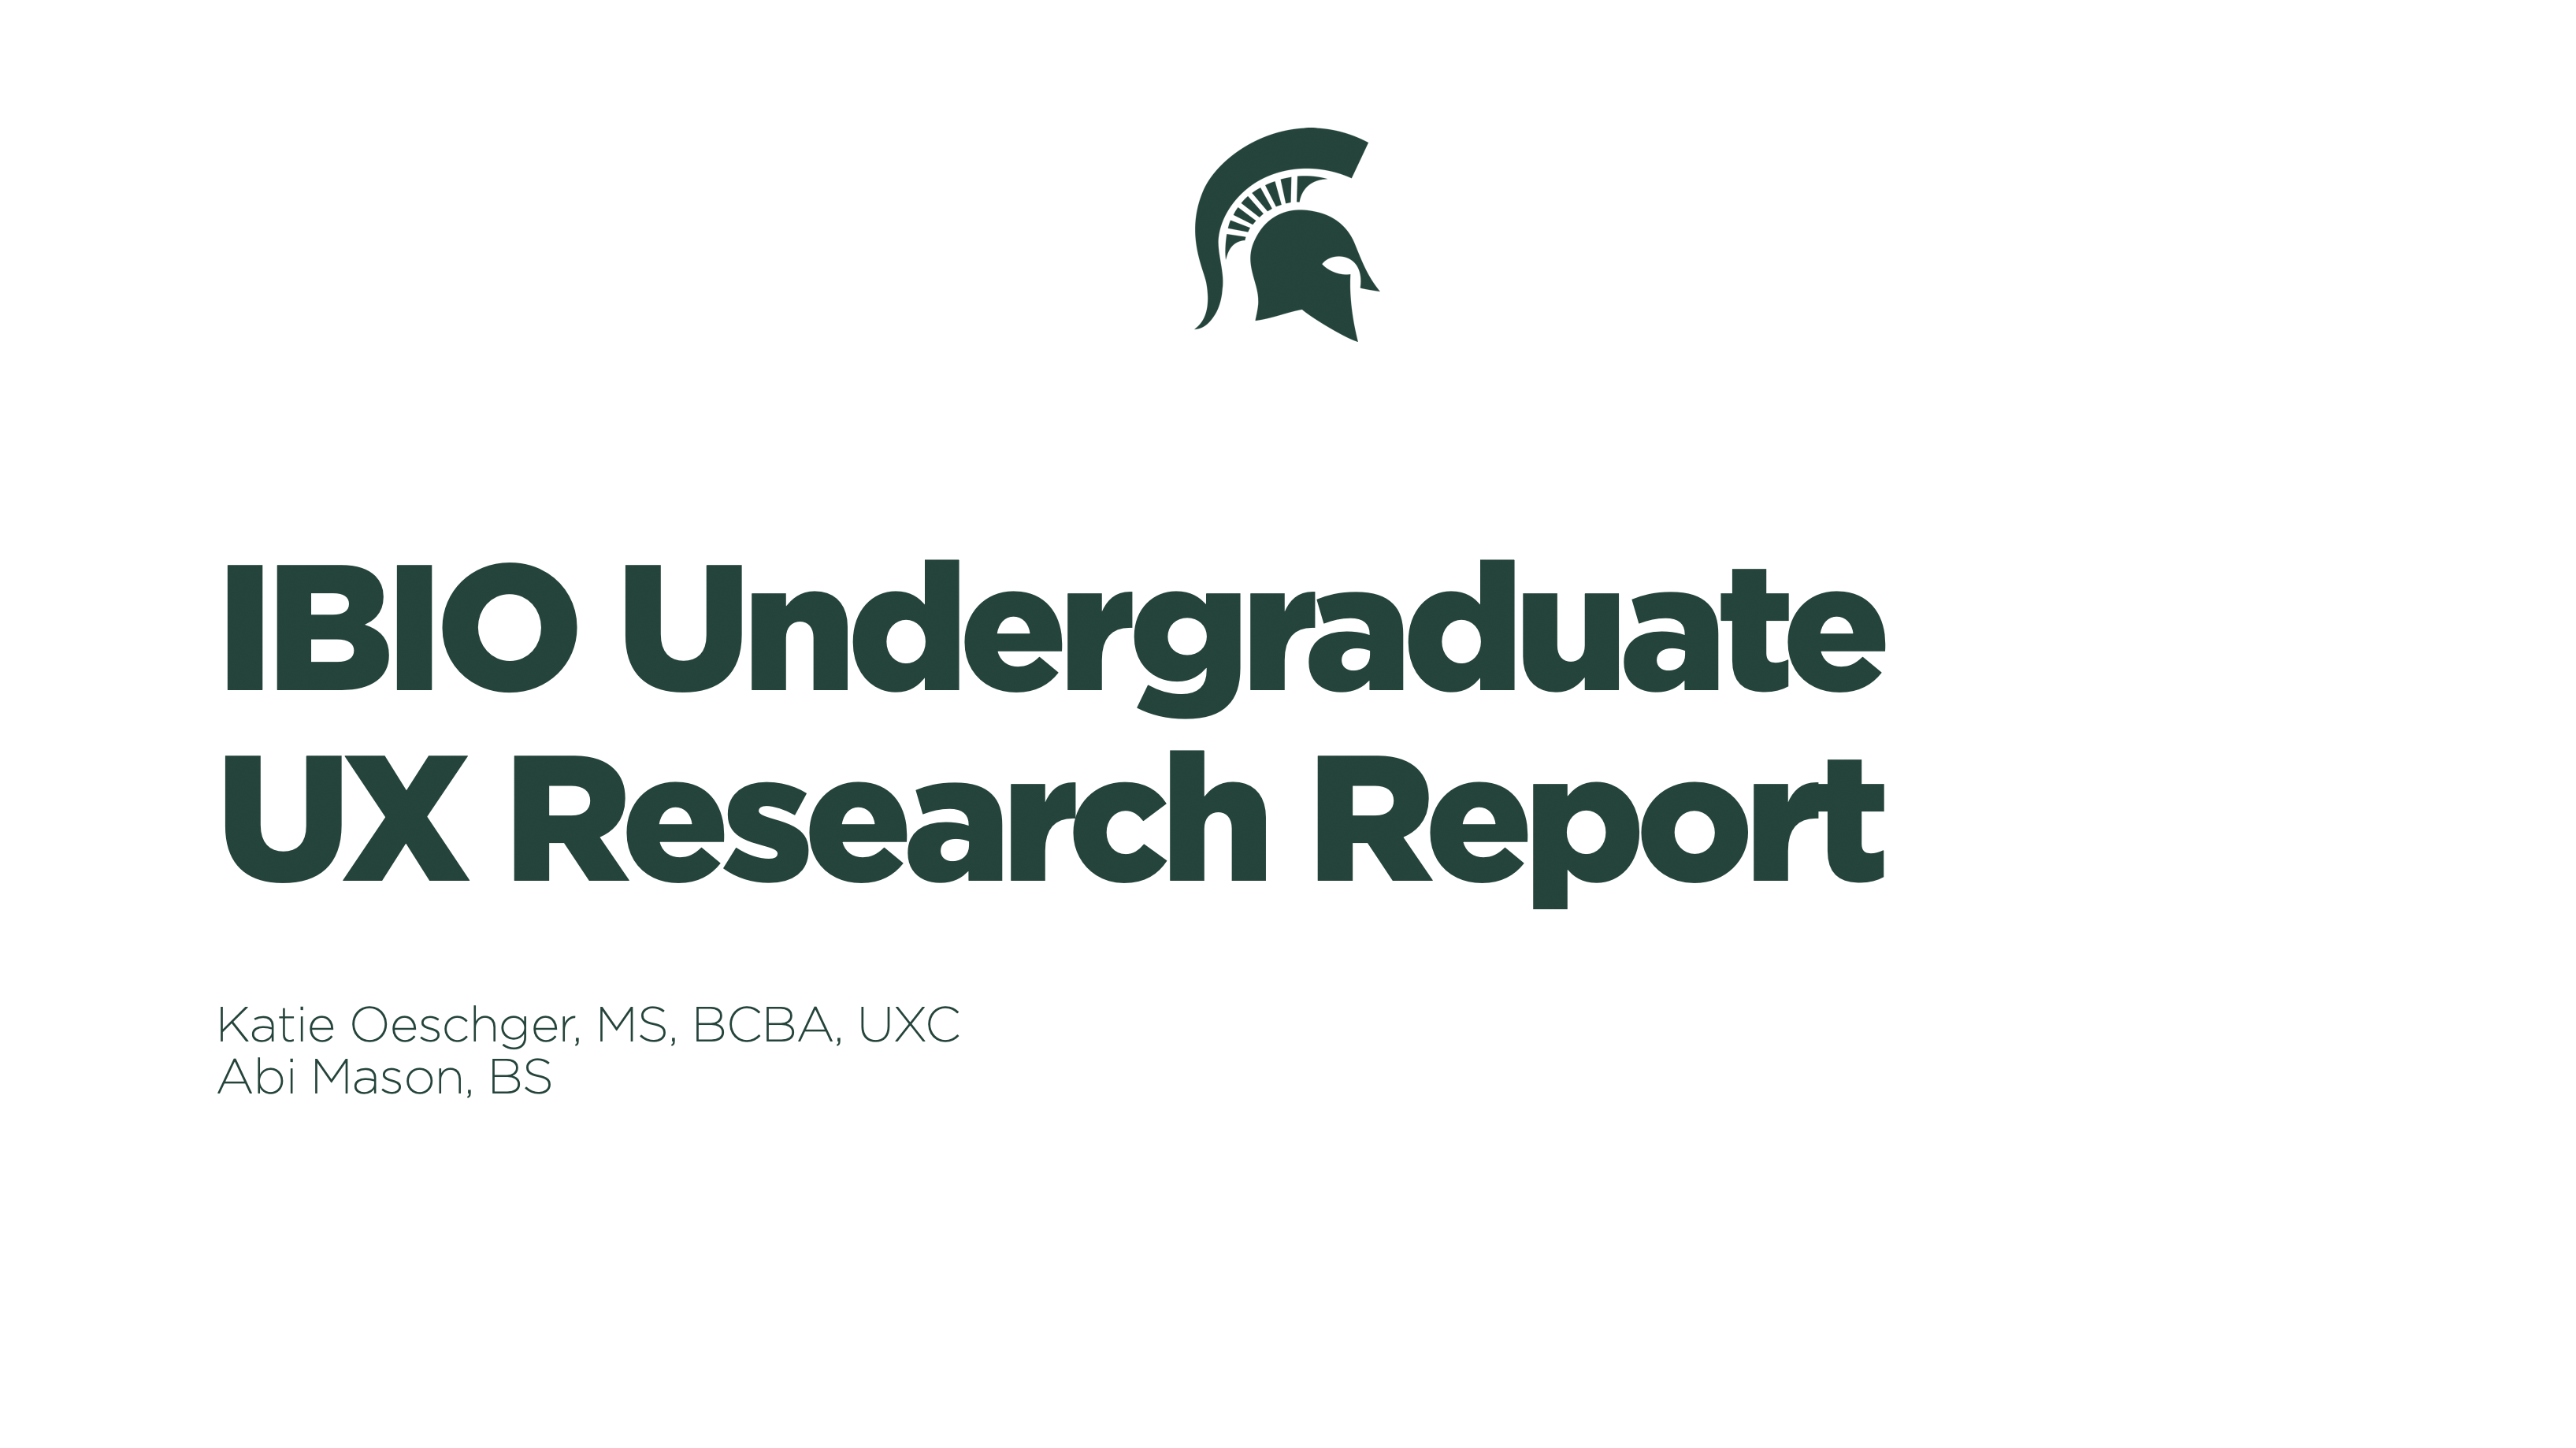 IBIO Undergraduate UX Research Report by Katie Oeschger and Abi Mason